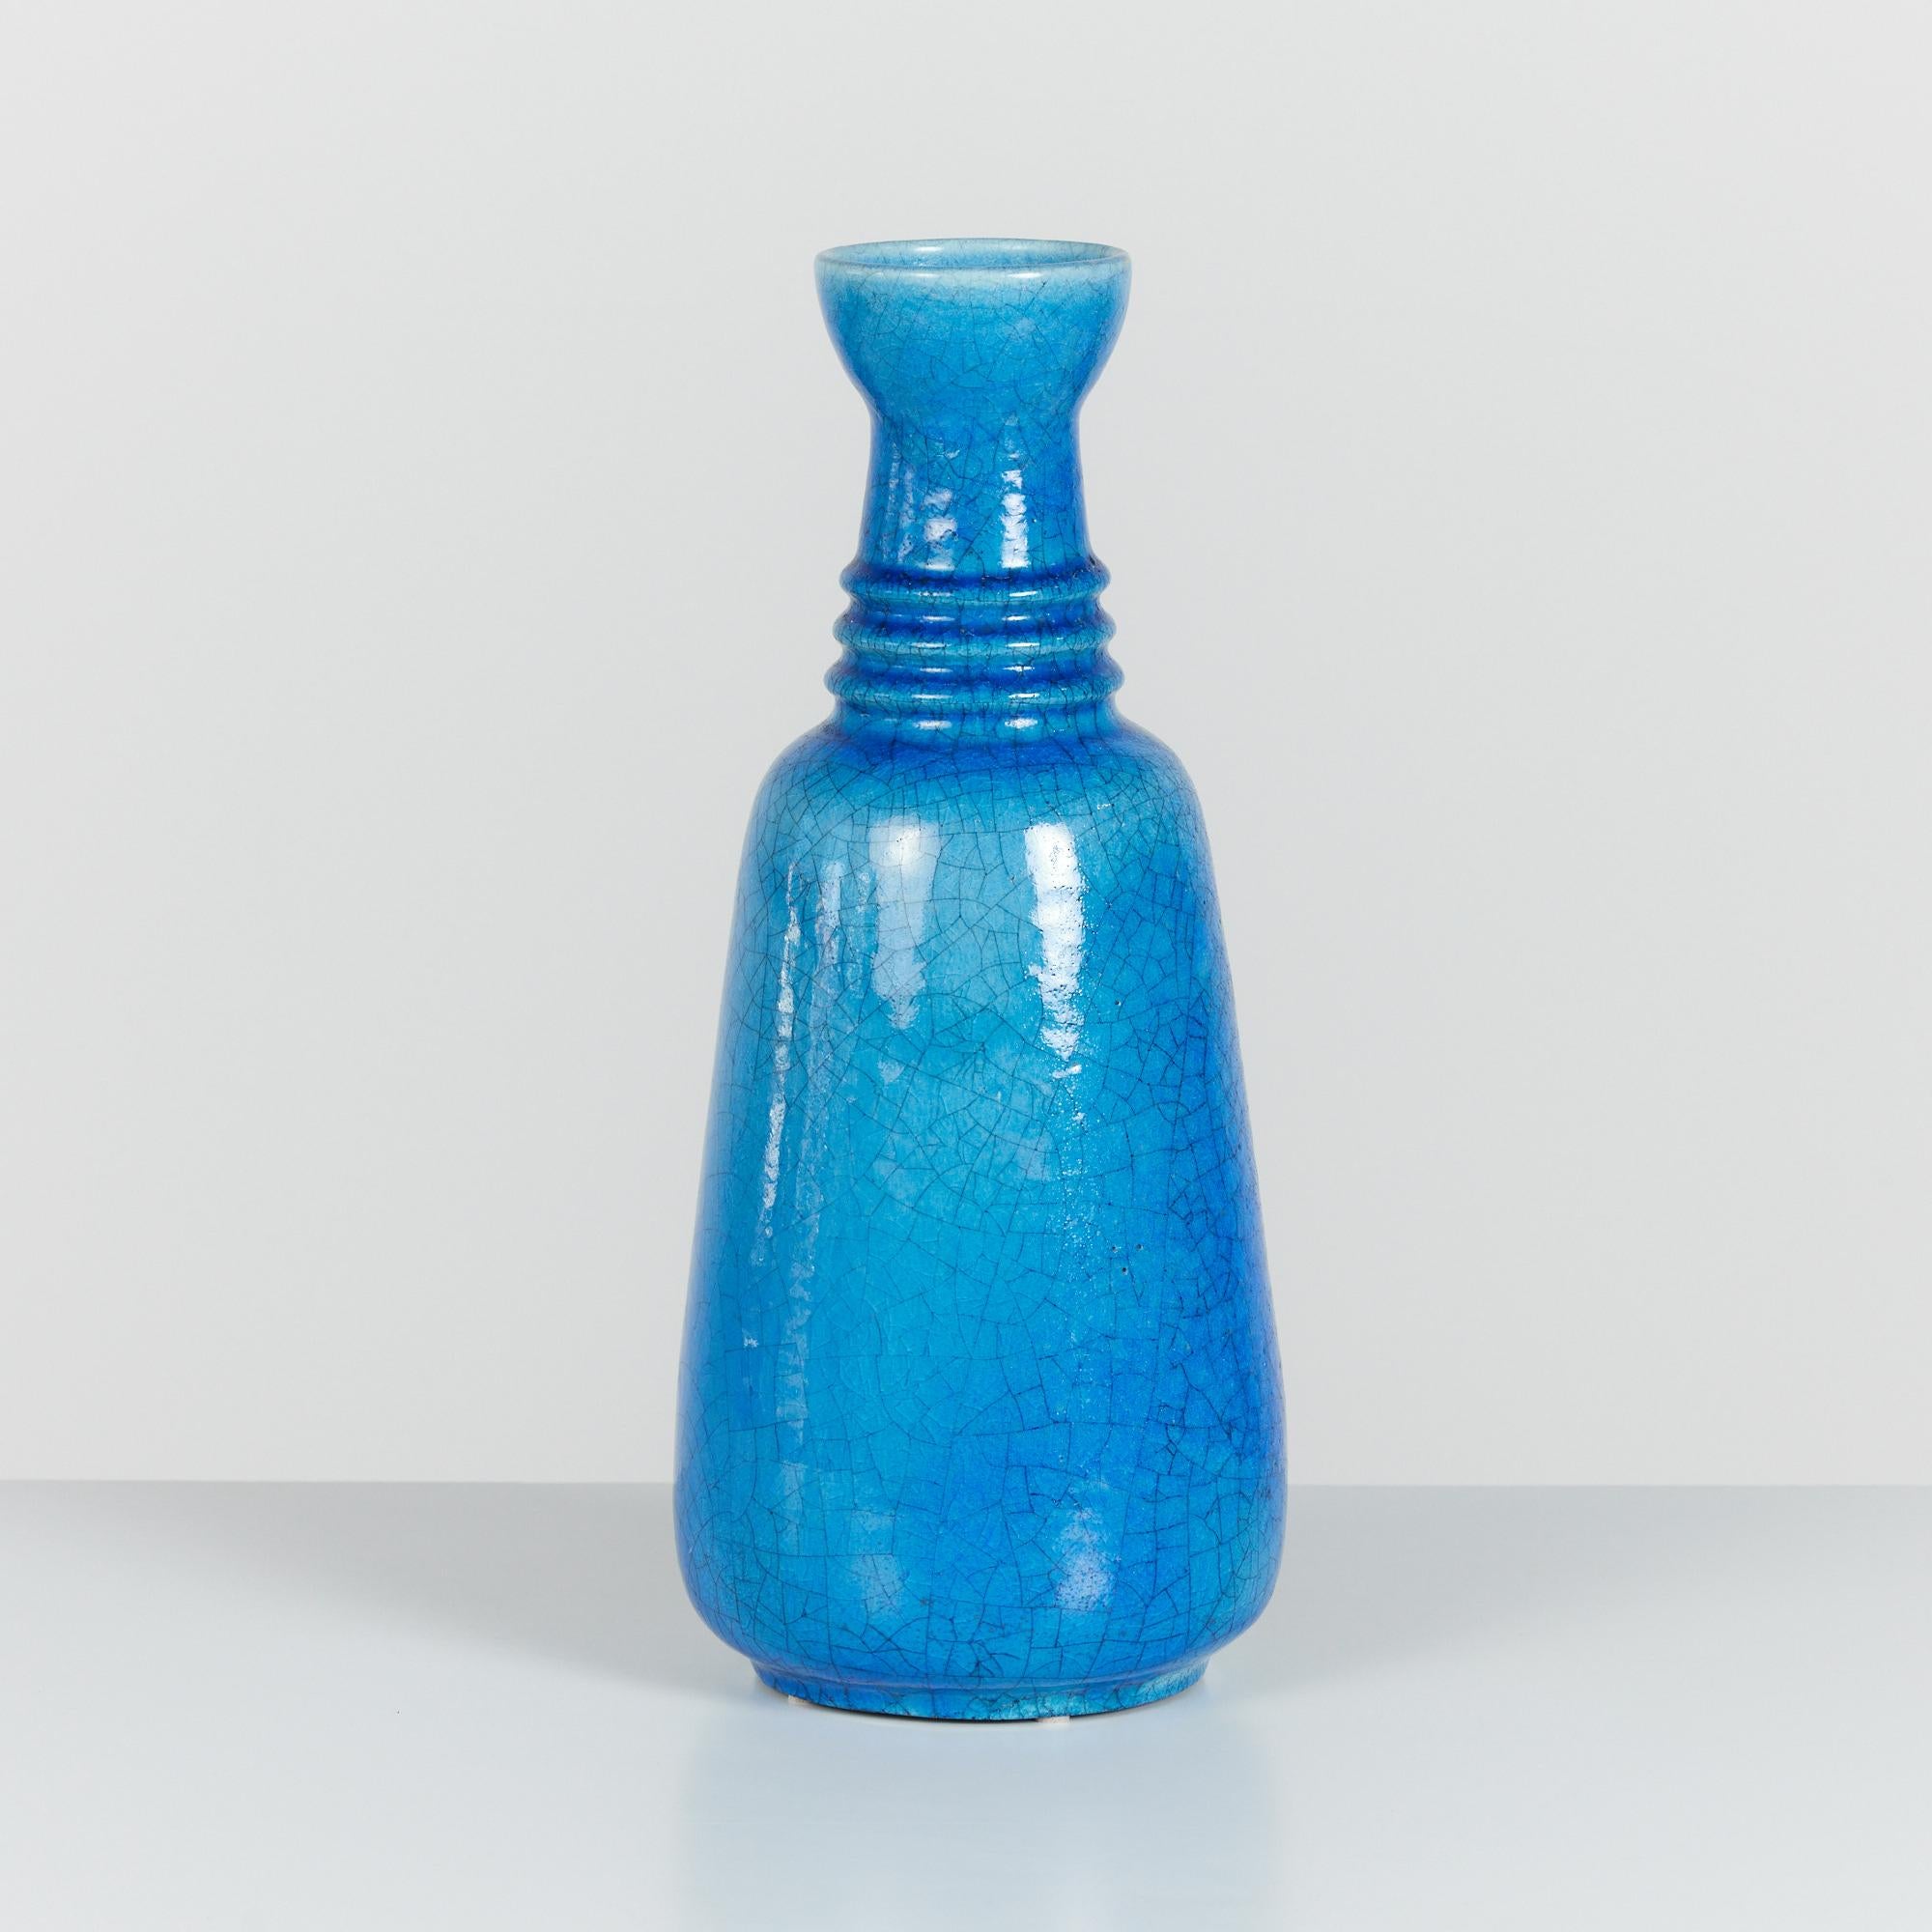 Ceramic vase by Arnold Zahner, circa 1960s, Rheinfelden, Switzerland. This vase features a blue glossy crackle glaze throughout. The neck has a ribbed detailing and tulip opening. Artist stamp on the underside.

Dimensions
7